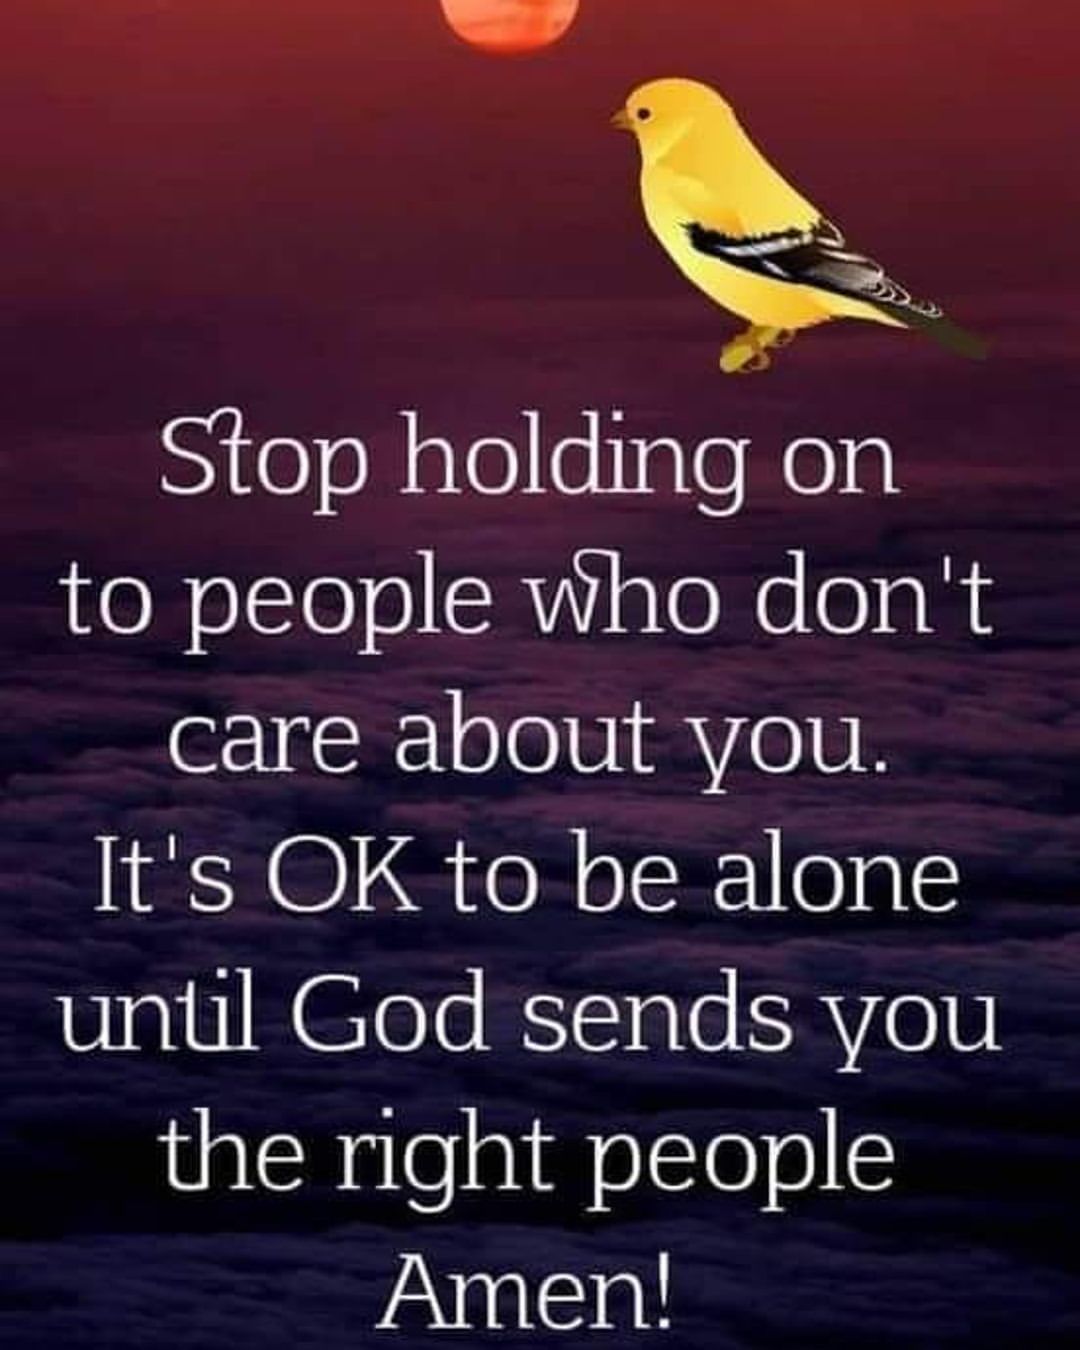 Stop holding on to people who don't care about you. It's ok to be alone until God sends you the right people. Amen!